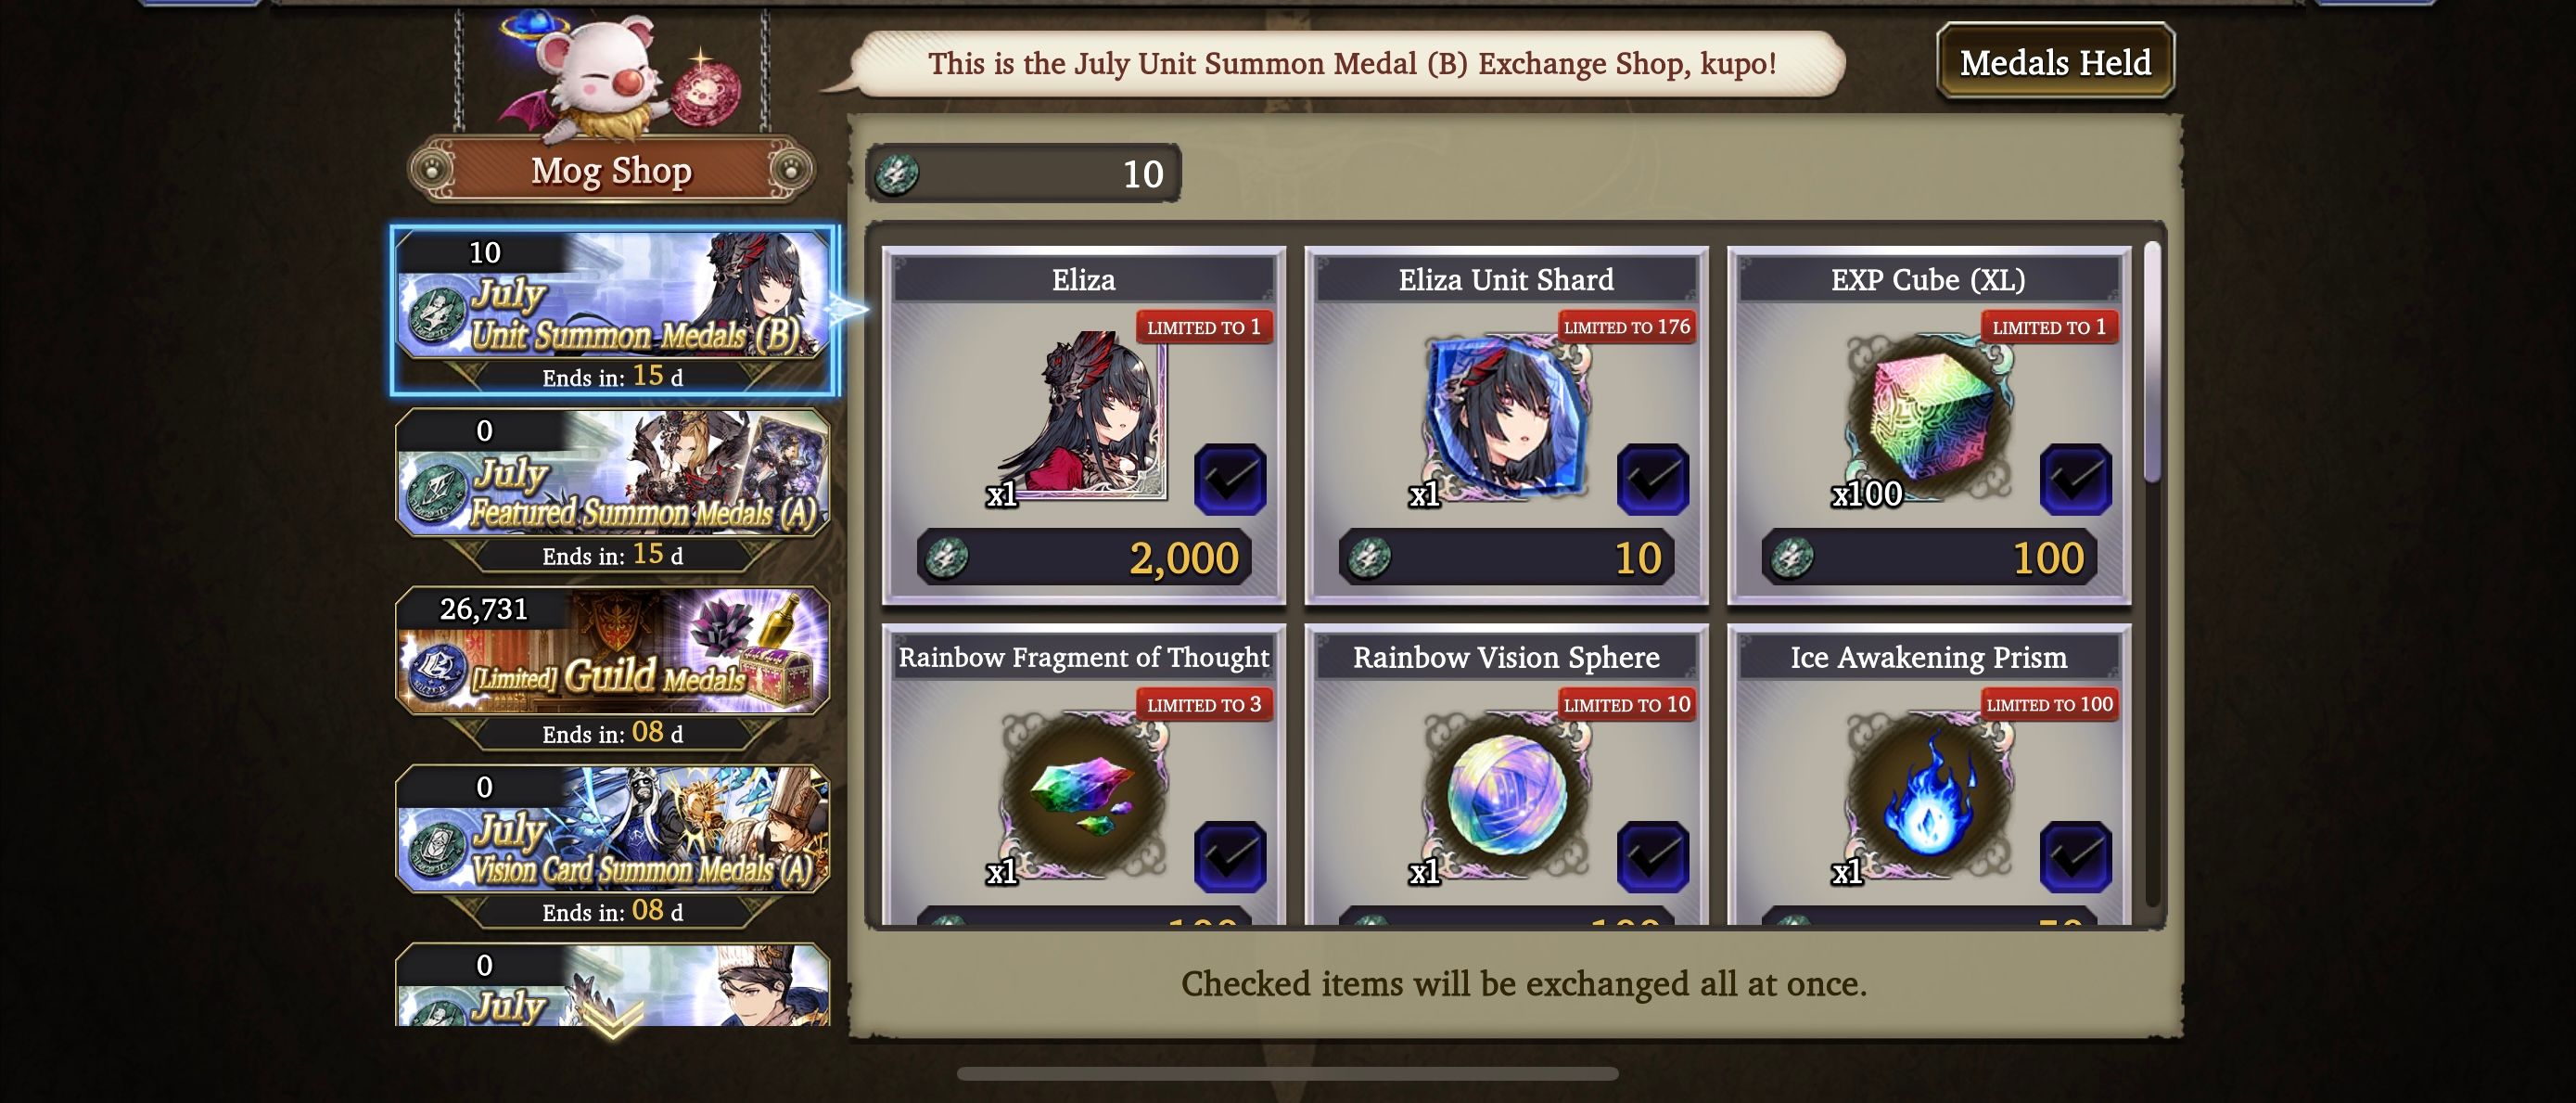 War of the Visions Final Fantasy Summon Medal Exchange